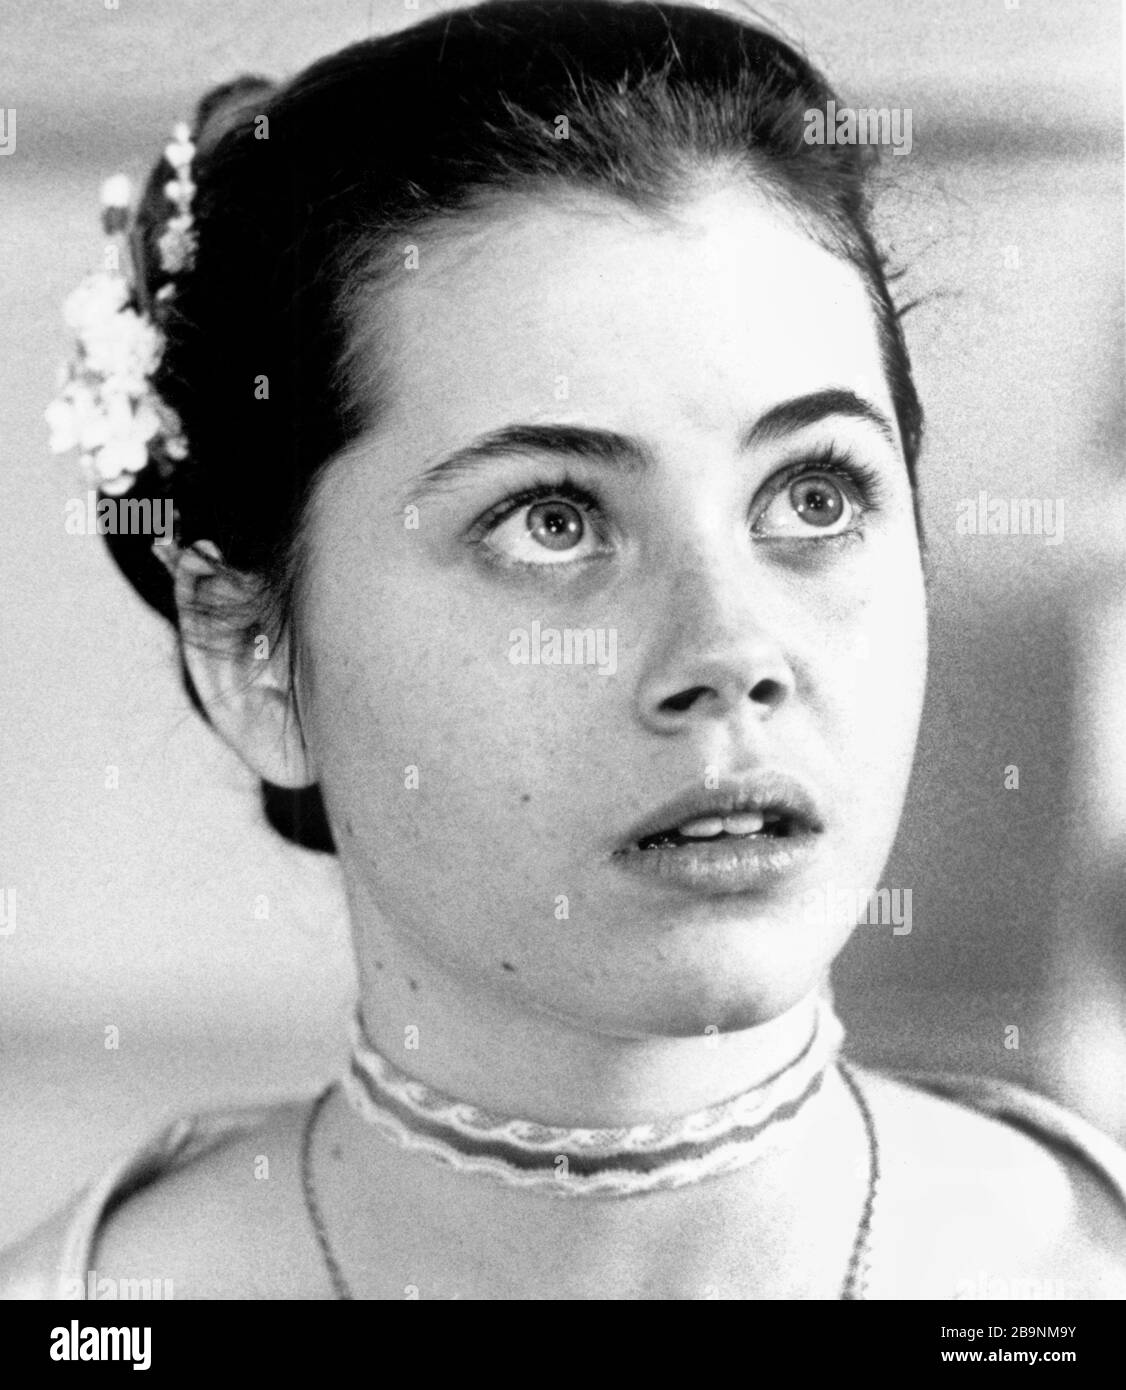 Fairuza Balk, Head and Shoulders Portrait for the Film, 'Valmont', Photo by Jaromir Komarek for Orion Pictures, 1989 Stock Photo